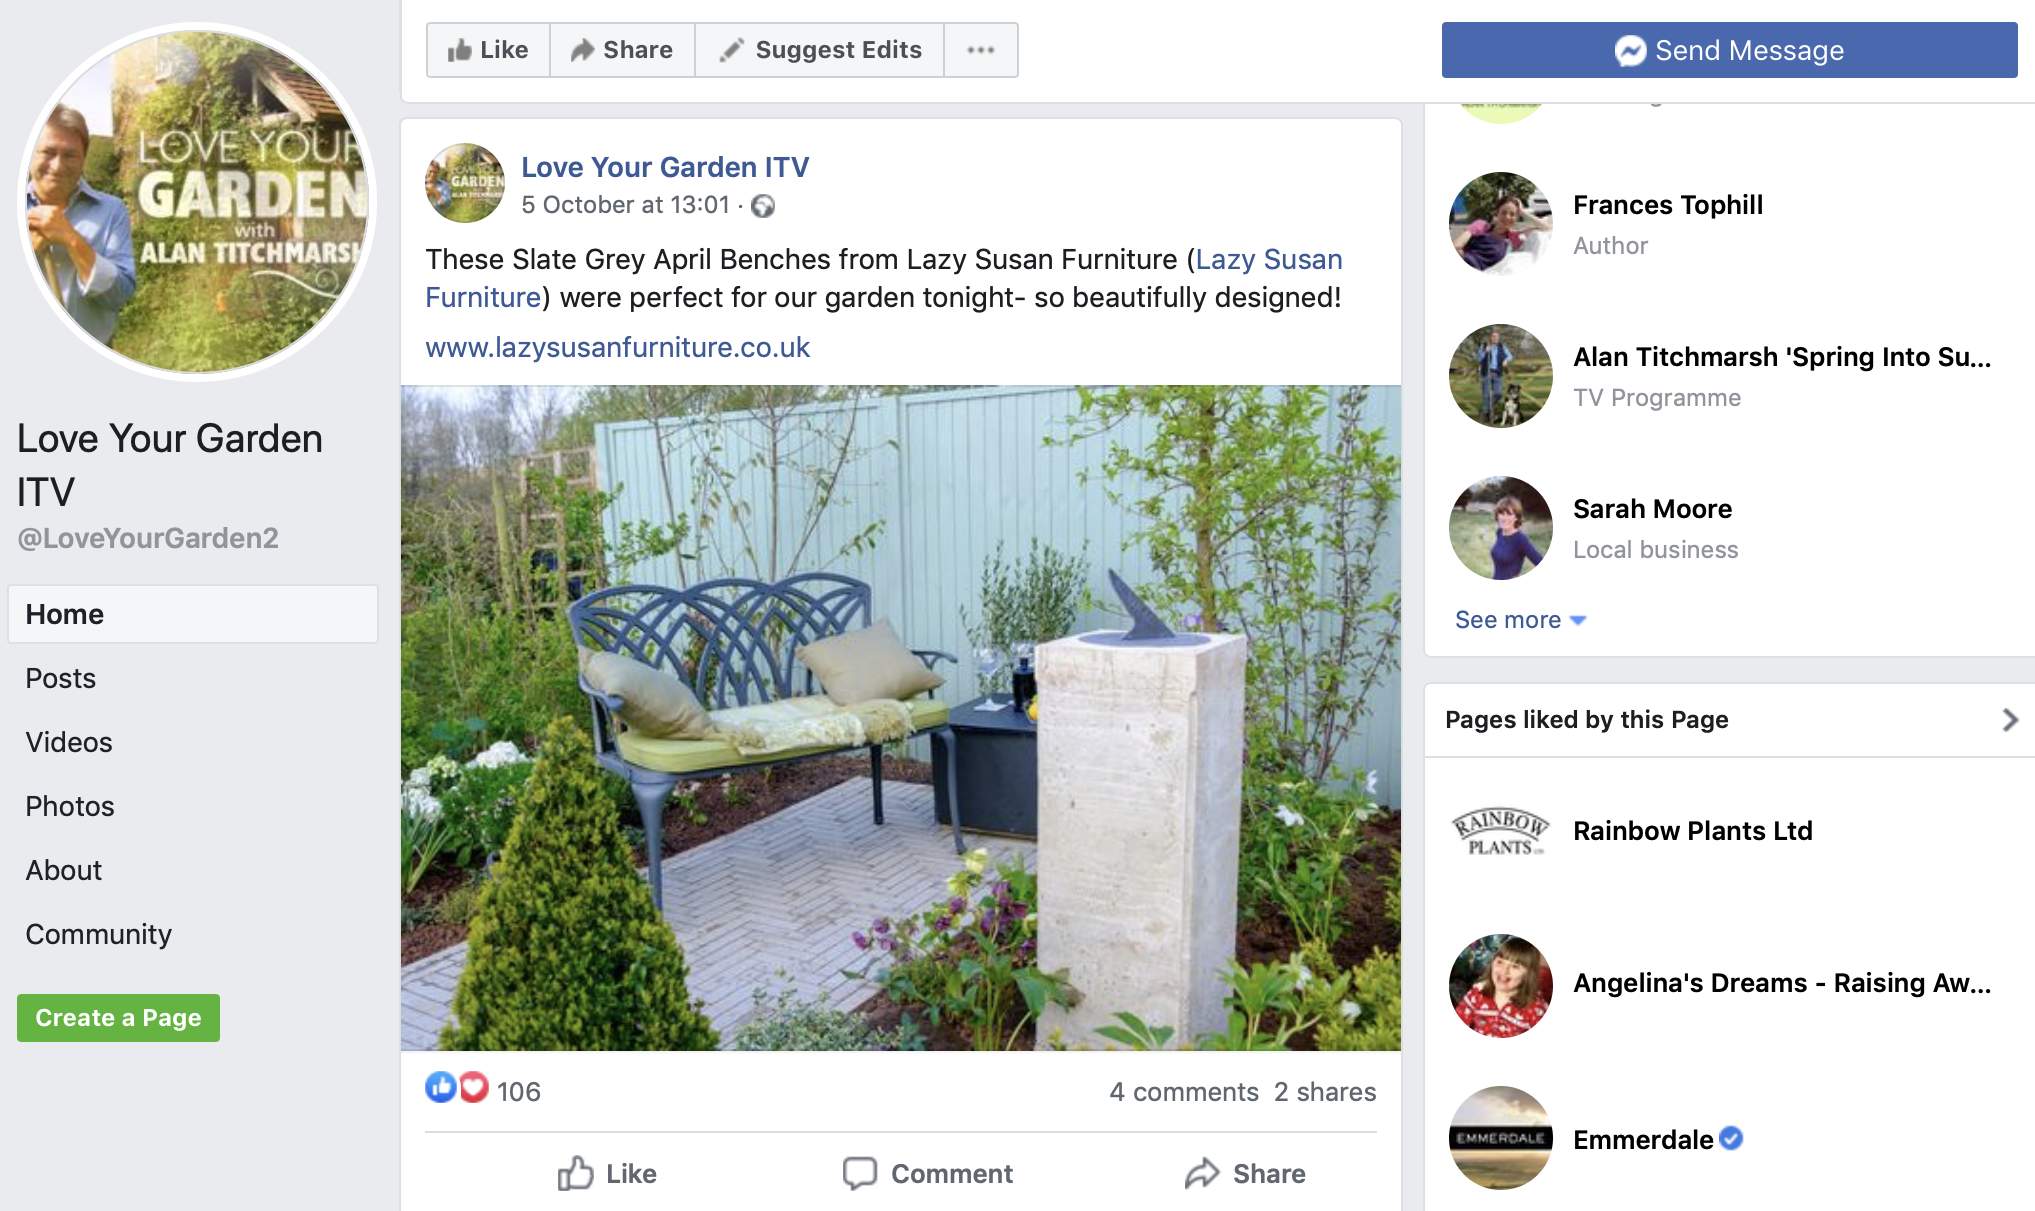 Love Your Garden also shared details of our April Bench on their Facebook page